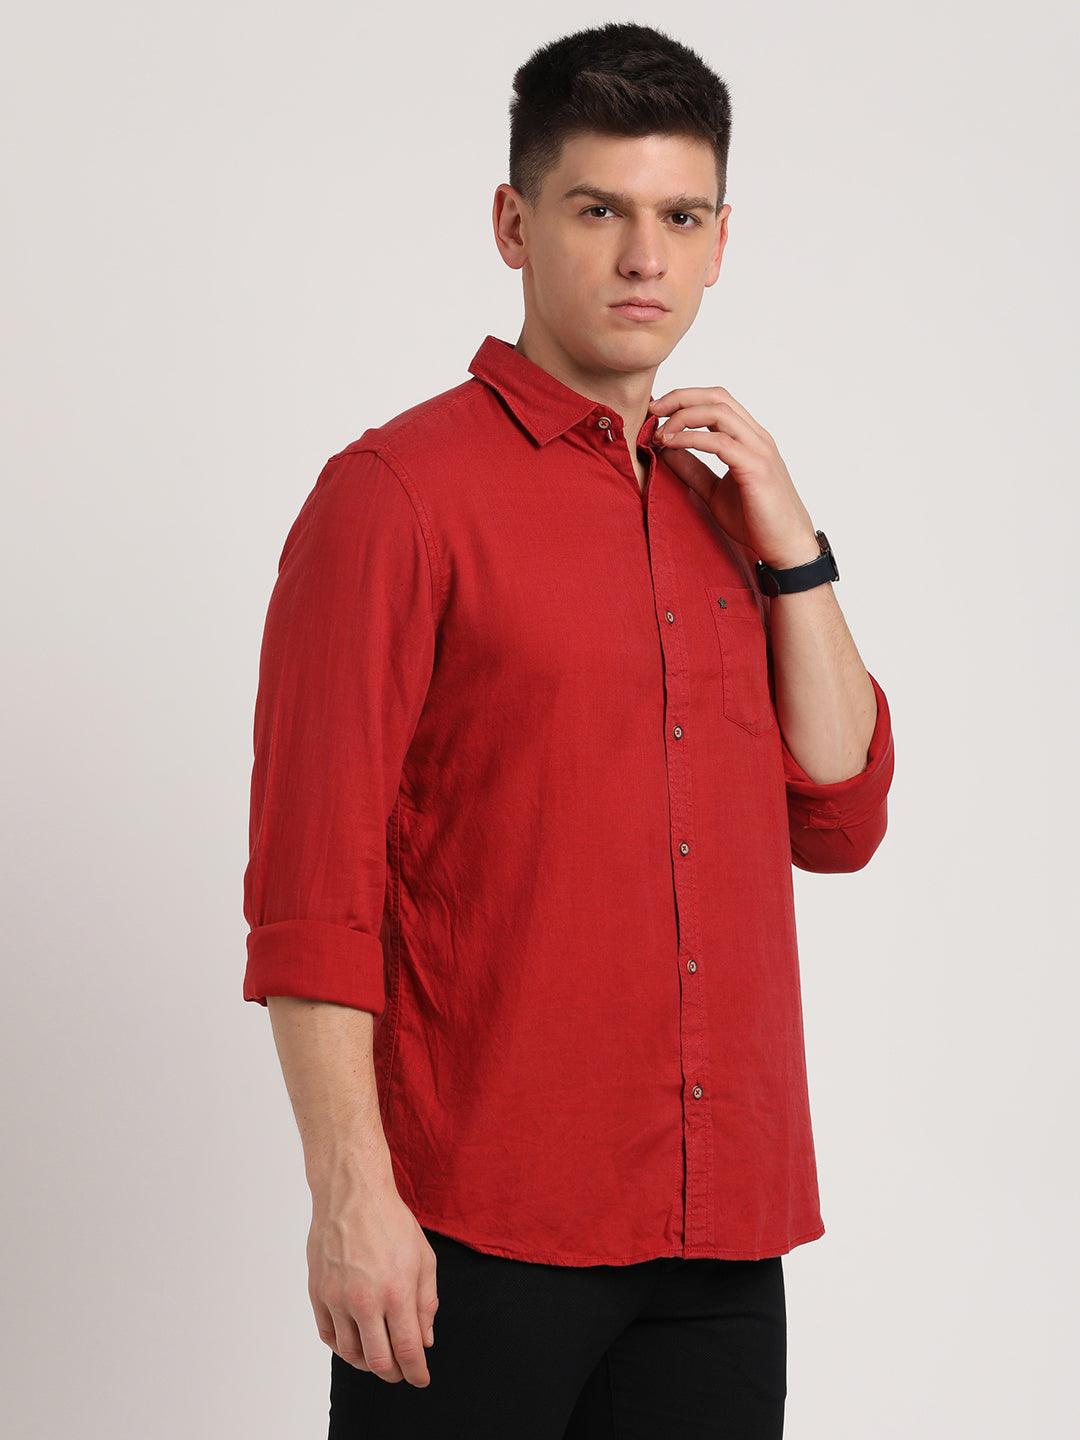 Cotton Lyocell Red Plain Slim Fit Half Sleeve Casual Shirt